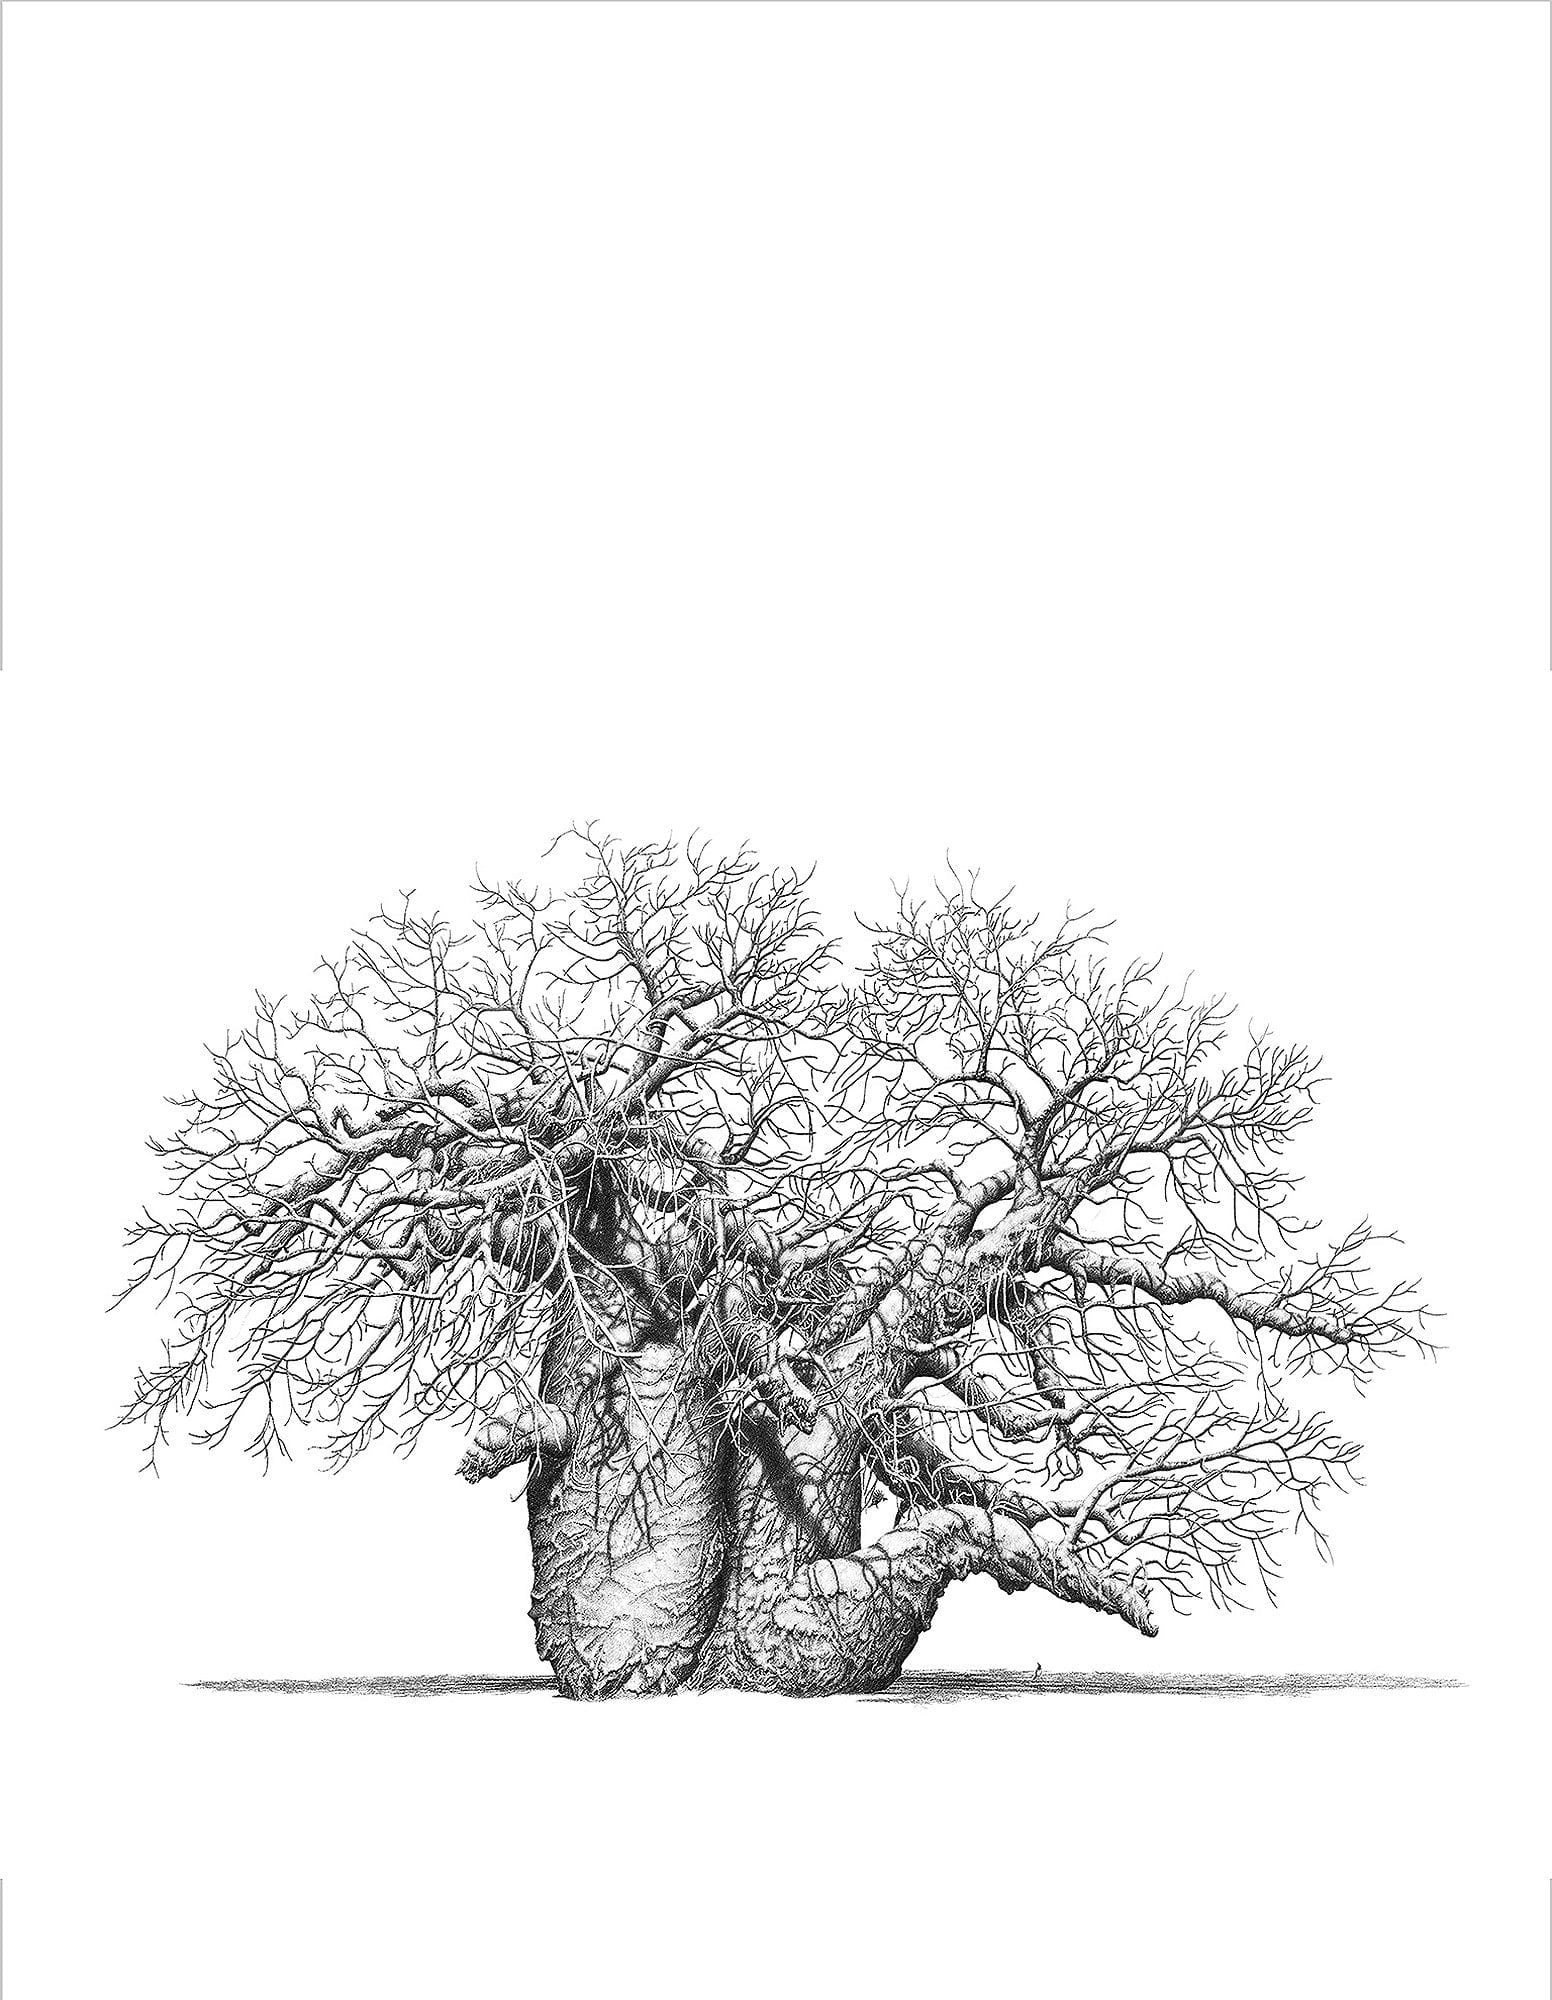 Baobab Tree Art by Bowen Boshier featuring a Baobab Tree with a Crow